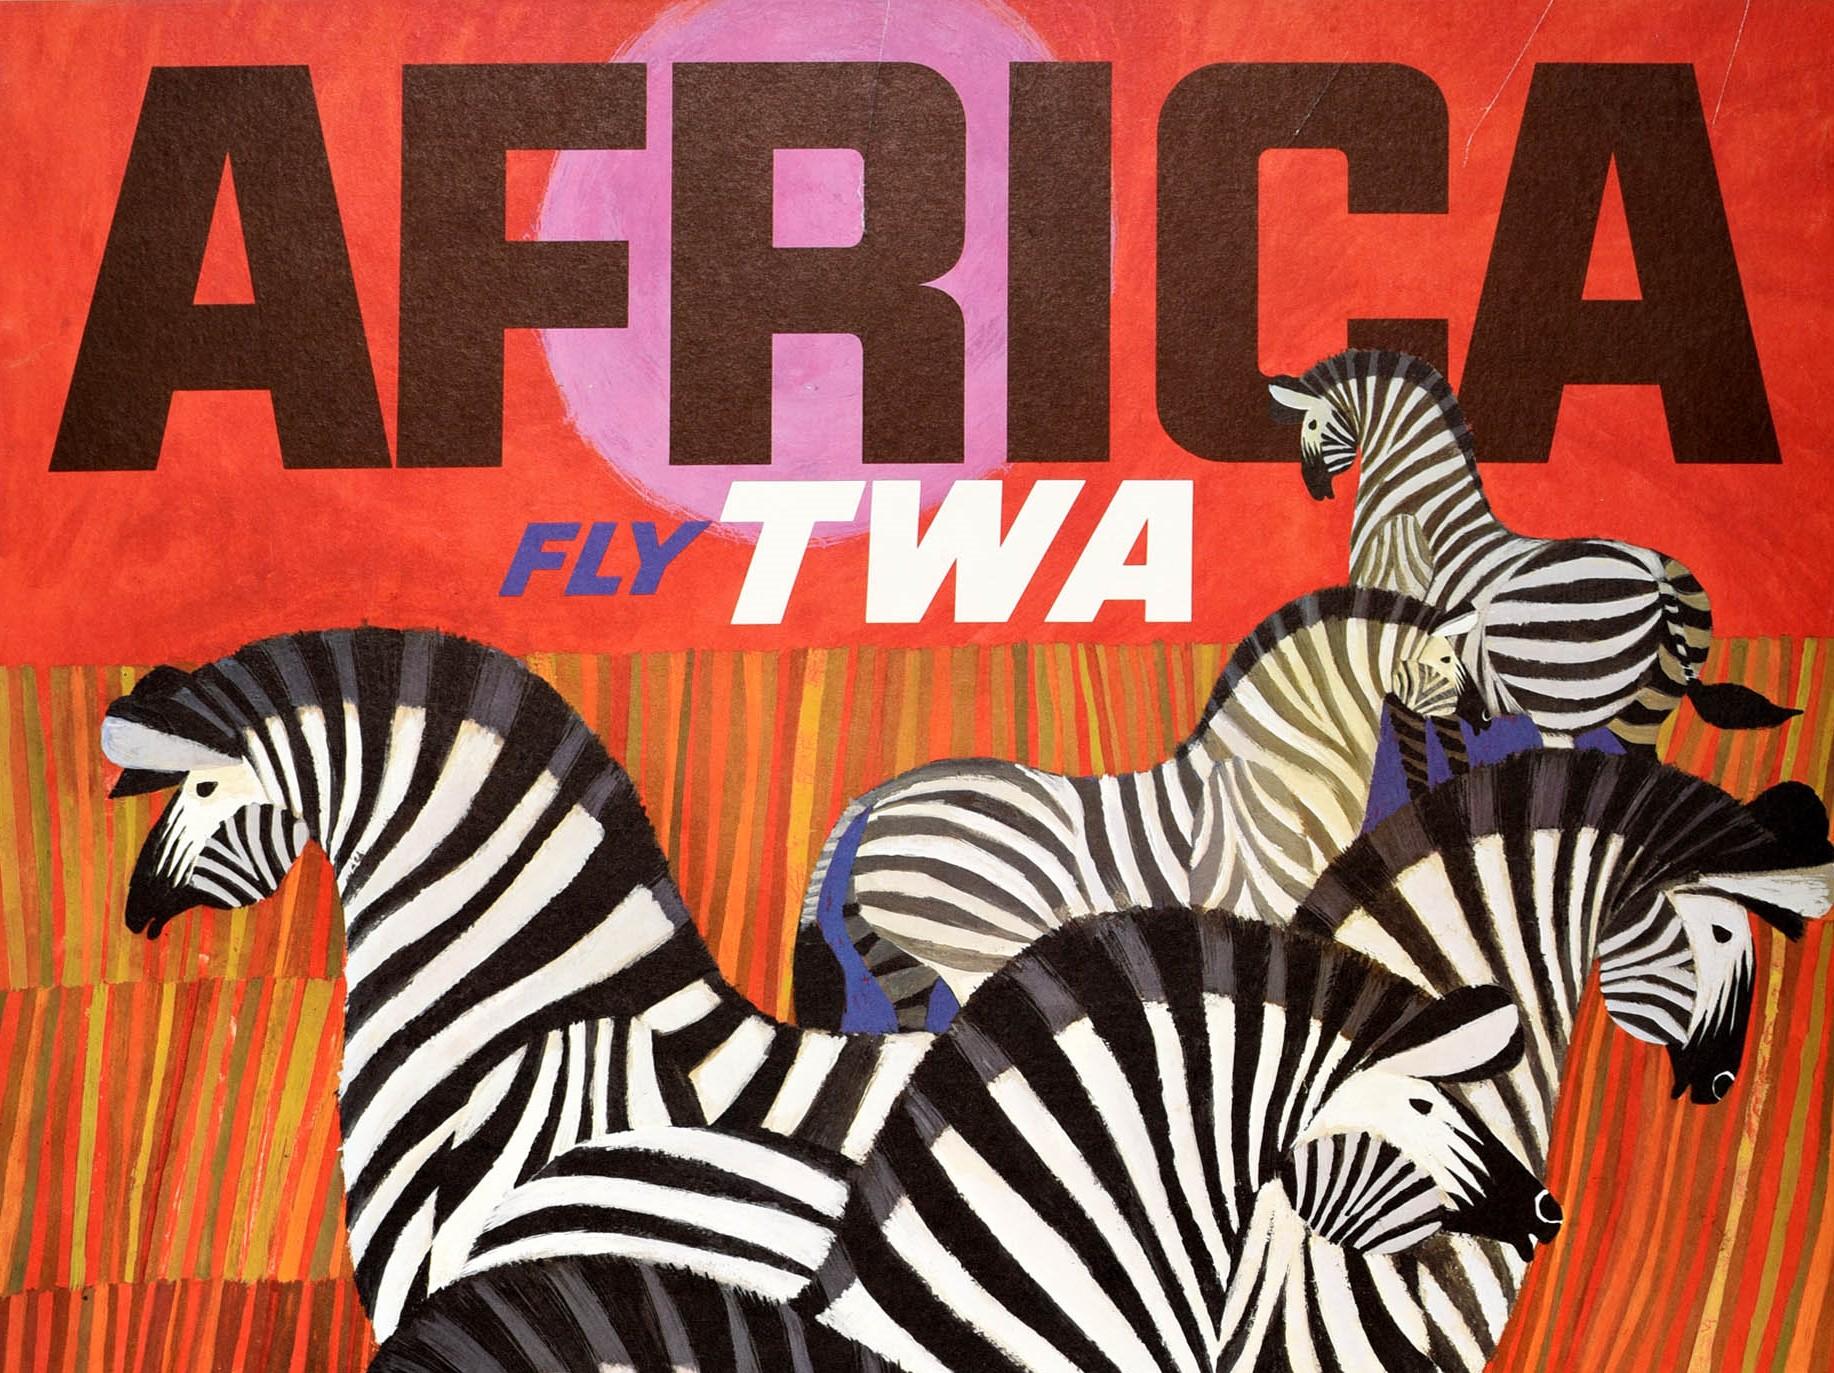 Original vintage mid-century airline travel poster for Africa Fly TWA Trans World Airlines up up and away TWA featuring a colourful iconic design by the notable American artist David Klein (1918-2005) of black and white zebras against a striped